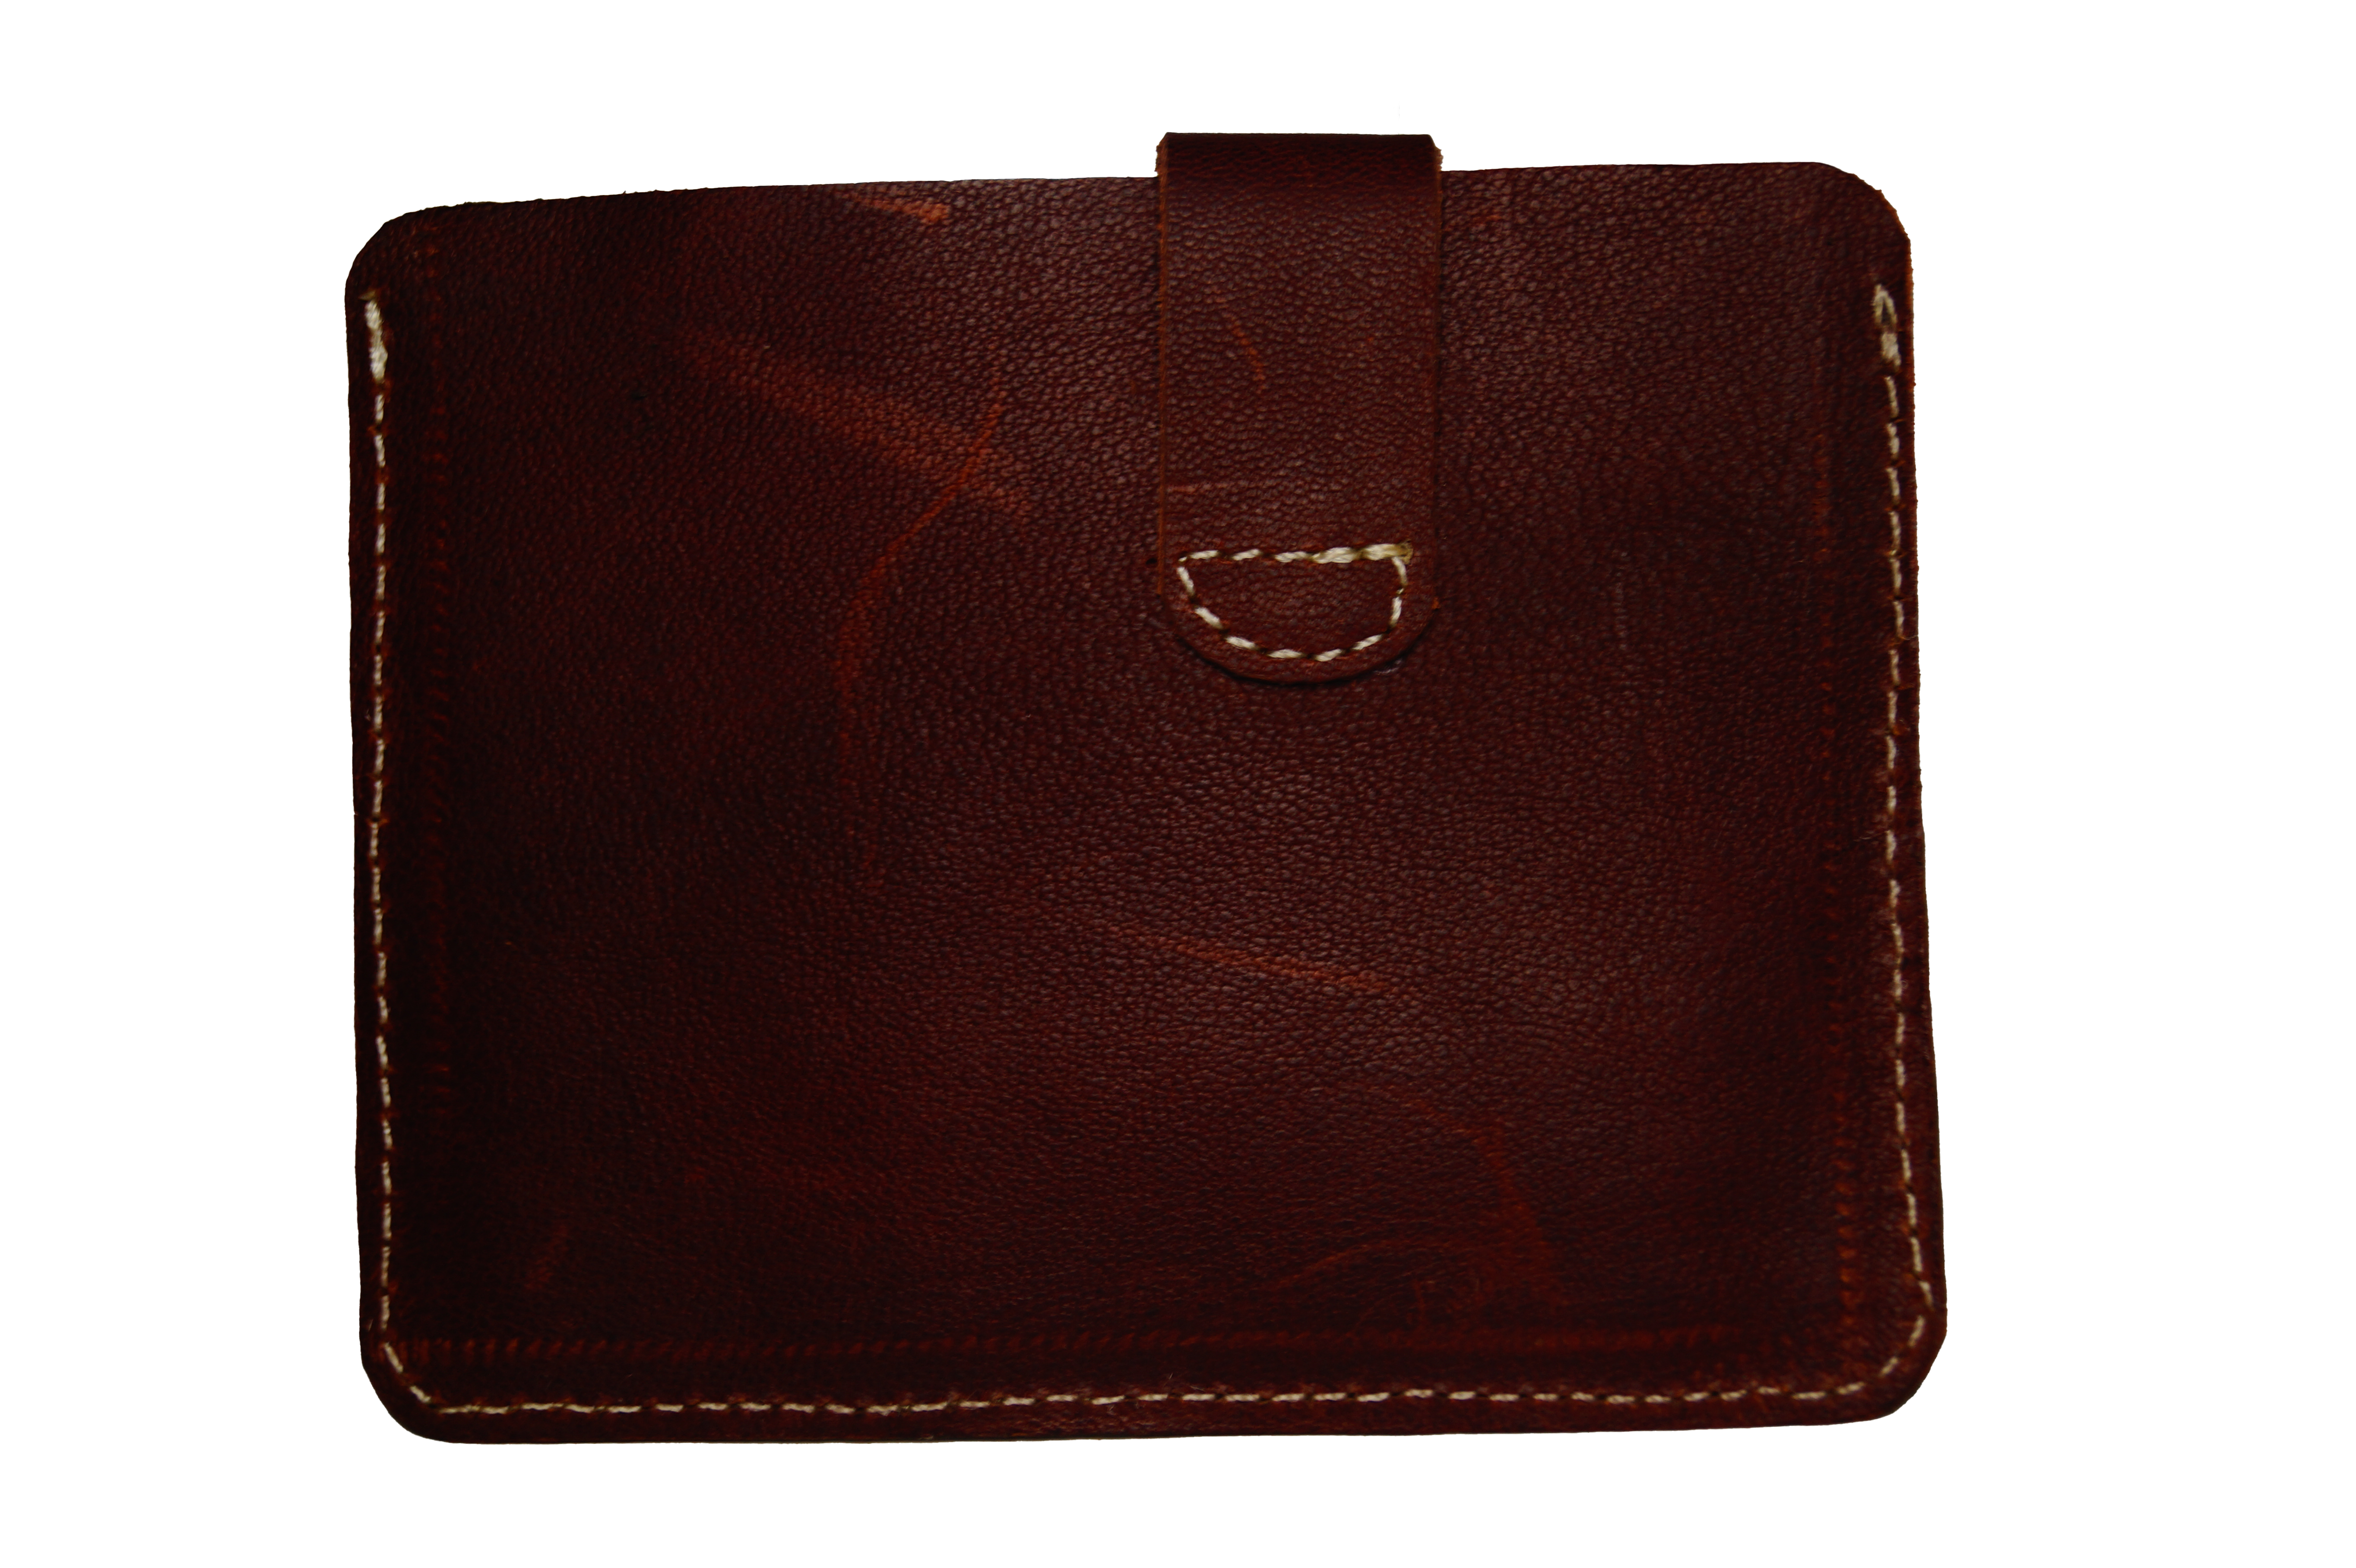 Vhaan's Heritage Oil Pulled Up Leather Card Holder - Maroon shade